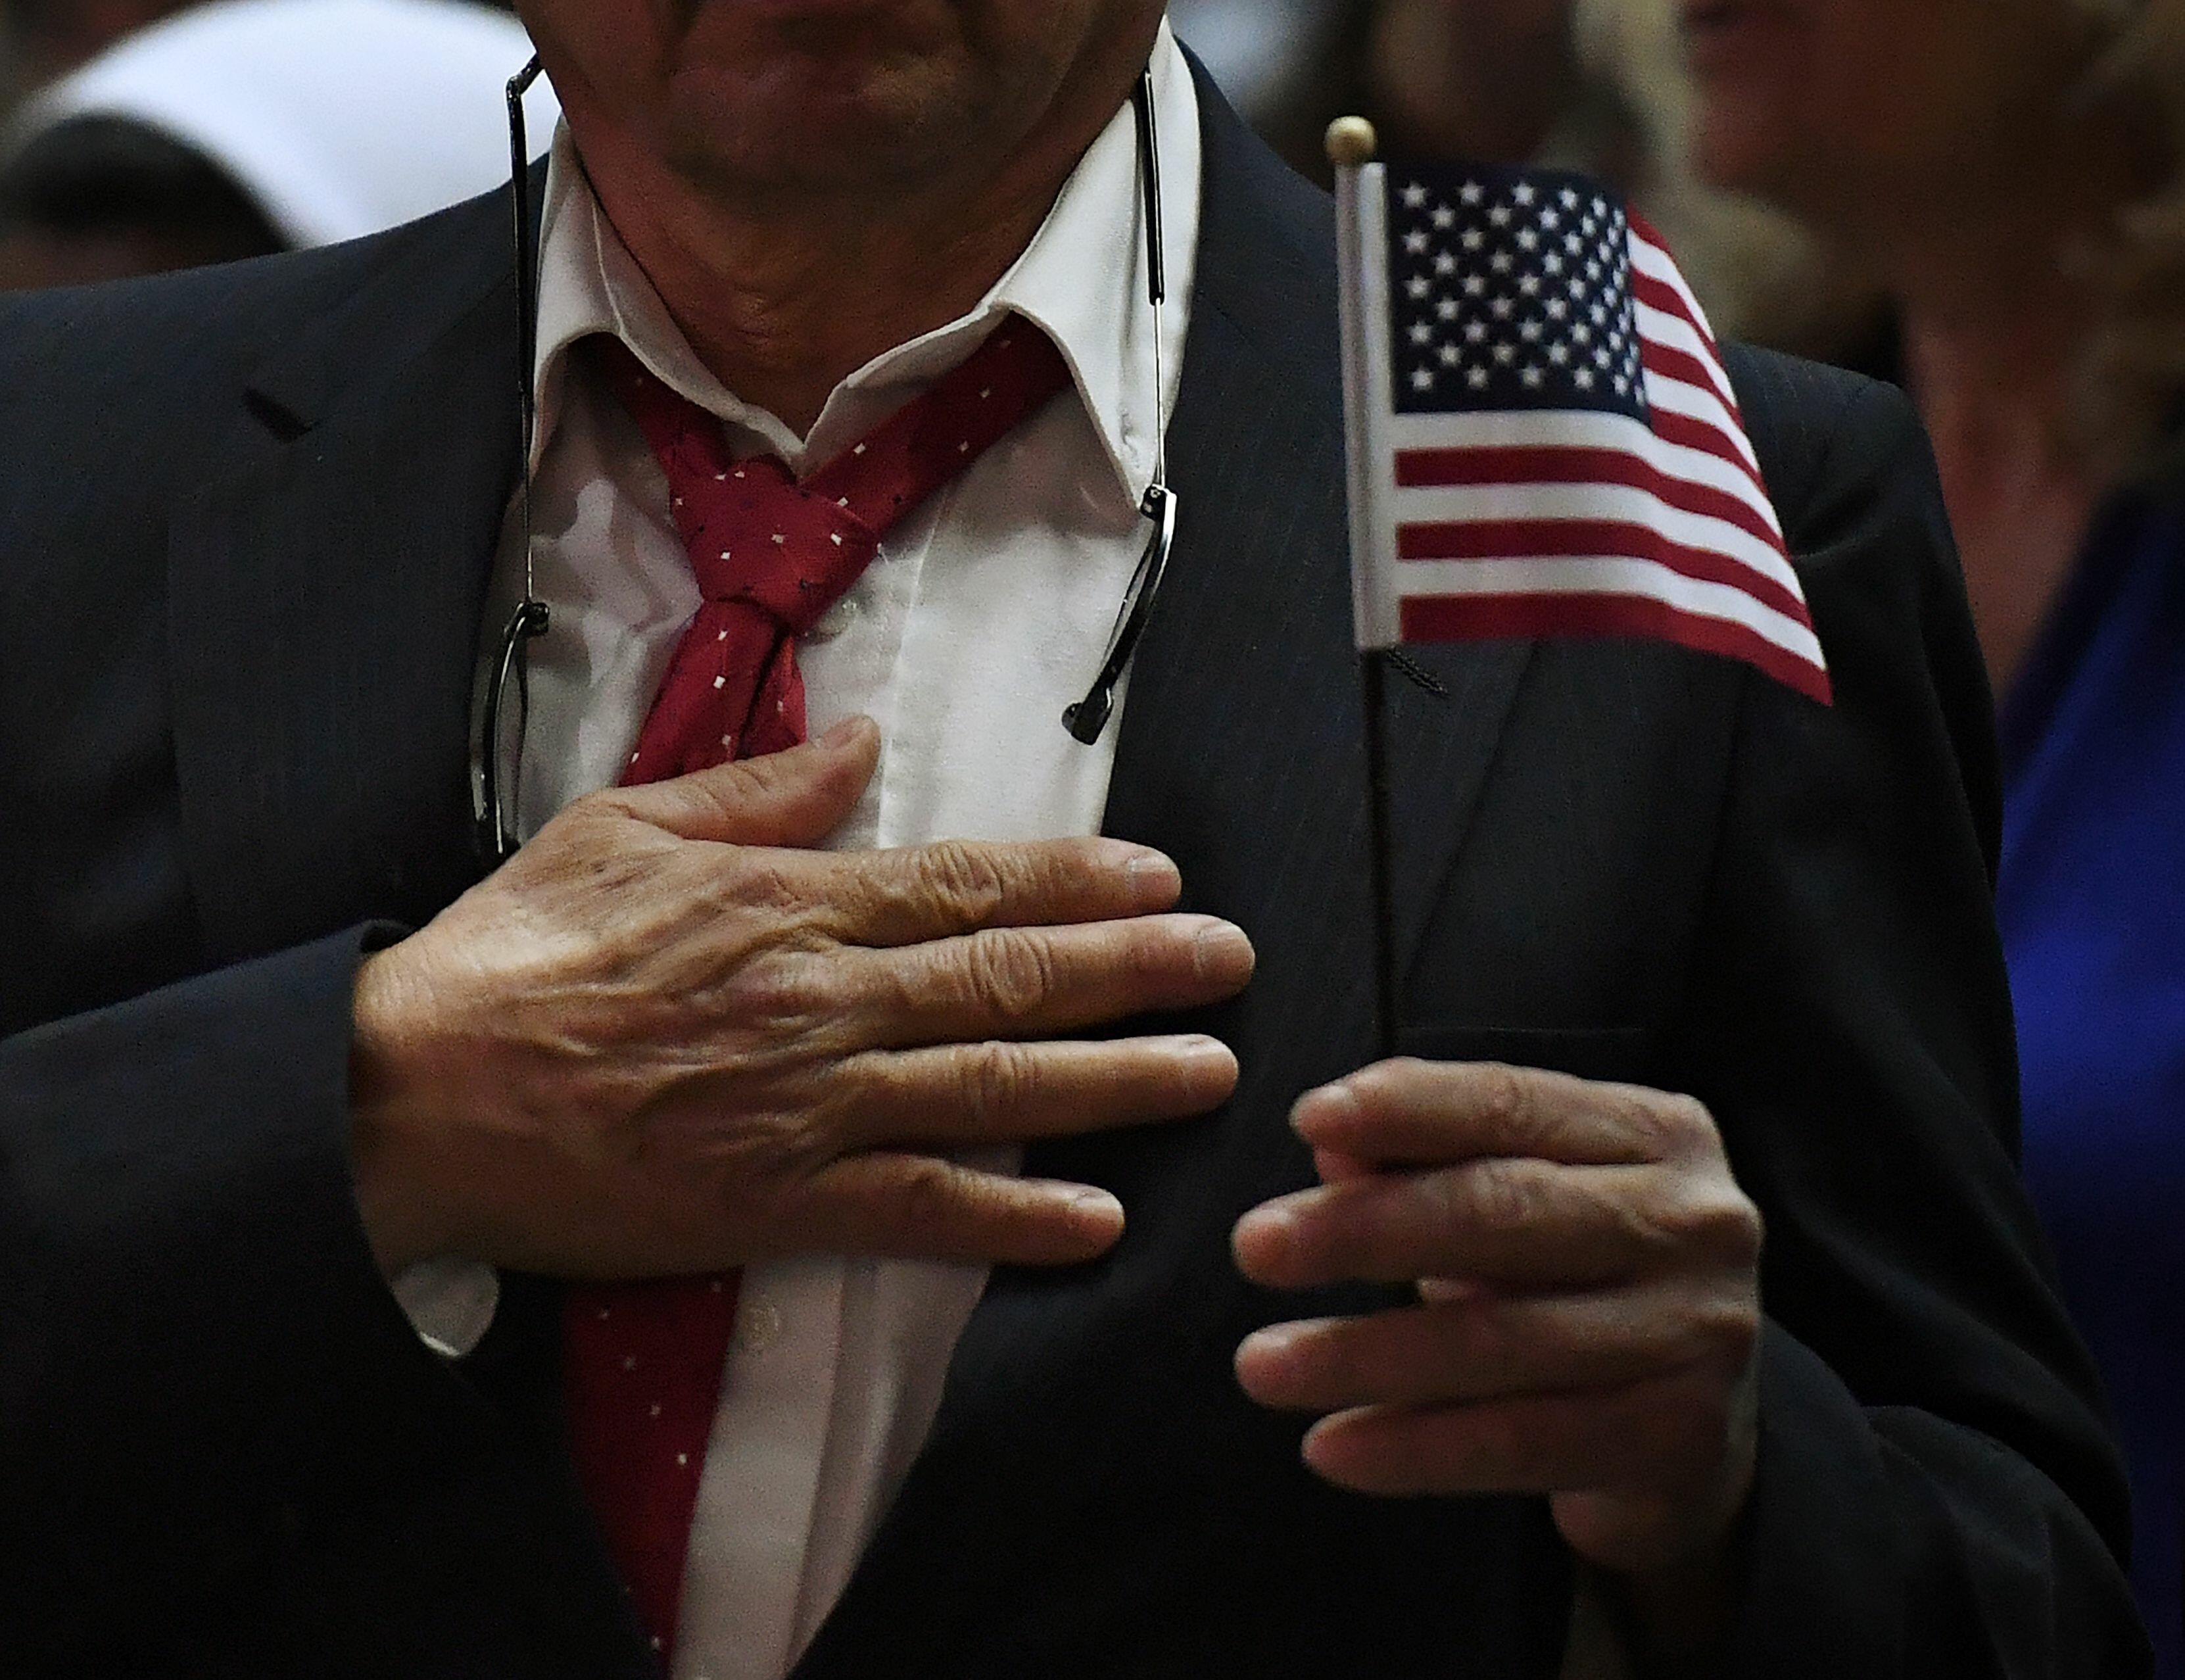 A man pledges allegiance to the United States of America to become a US citizenship at a naturalization ceremony for immigrants in Los Angeles, California, on February 15, 2017. Curbing immigration, as US President Donald Trump appears intent on doing, co